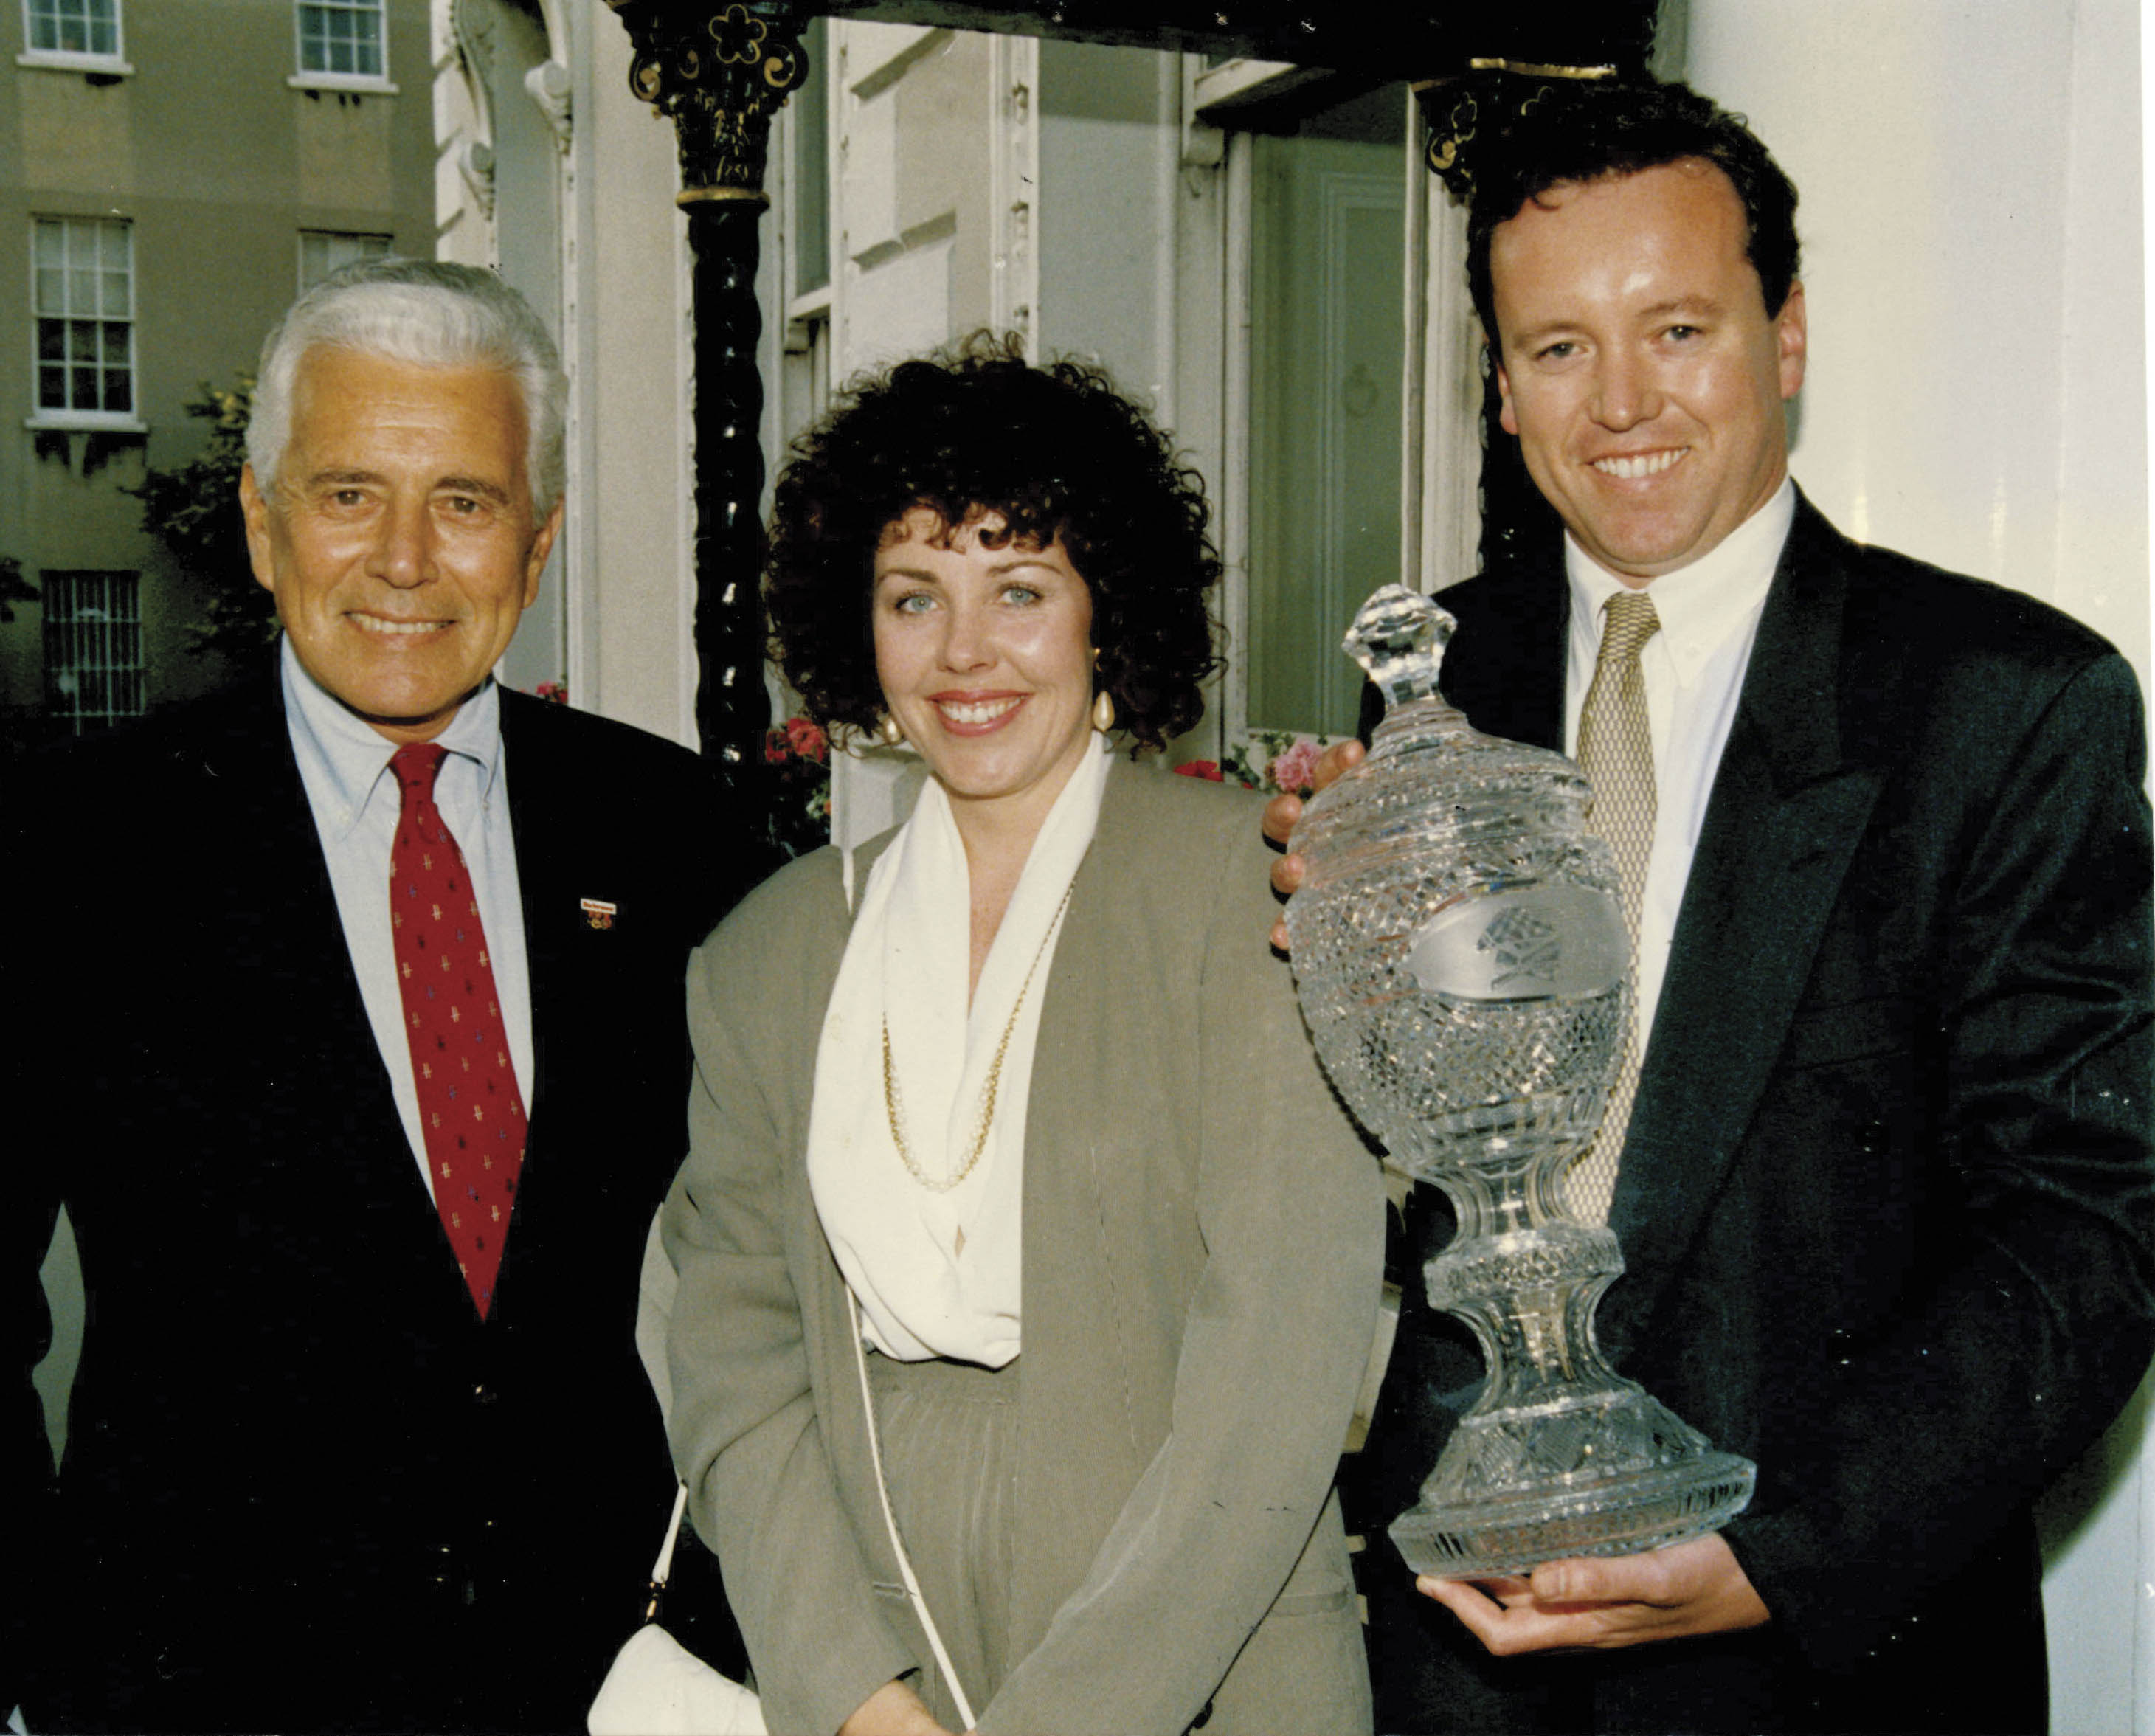 John Forsythe of Dynasty fame along with Jean and the Budweiser Irish Derby Trophy at Dublin’s Mansion House.